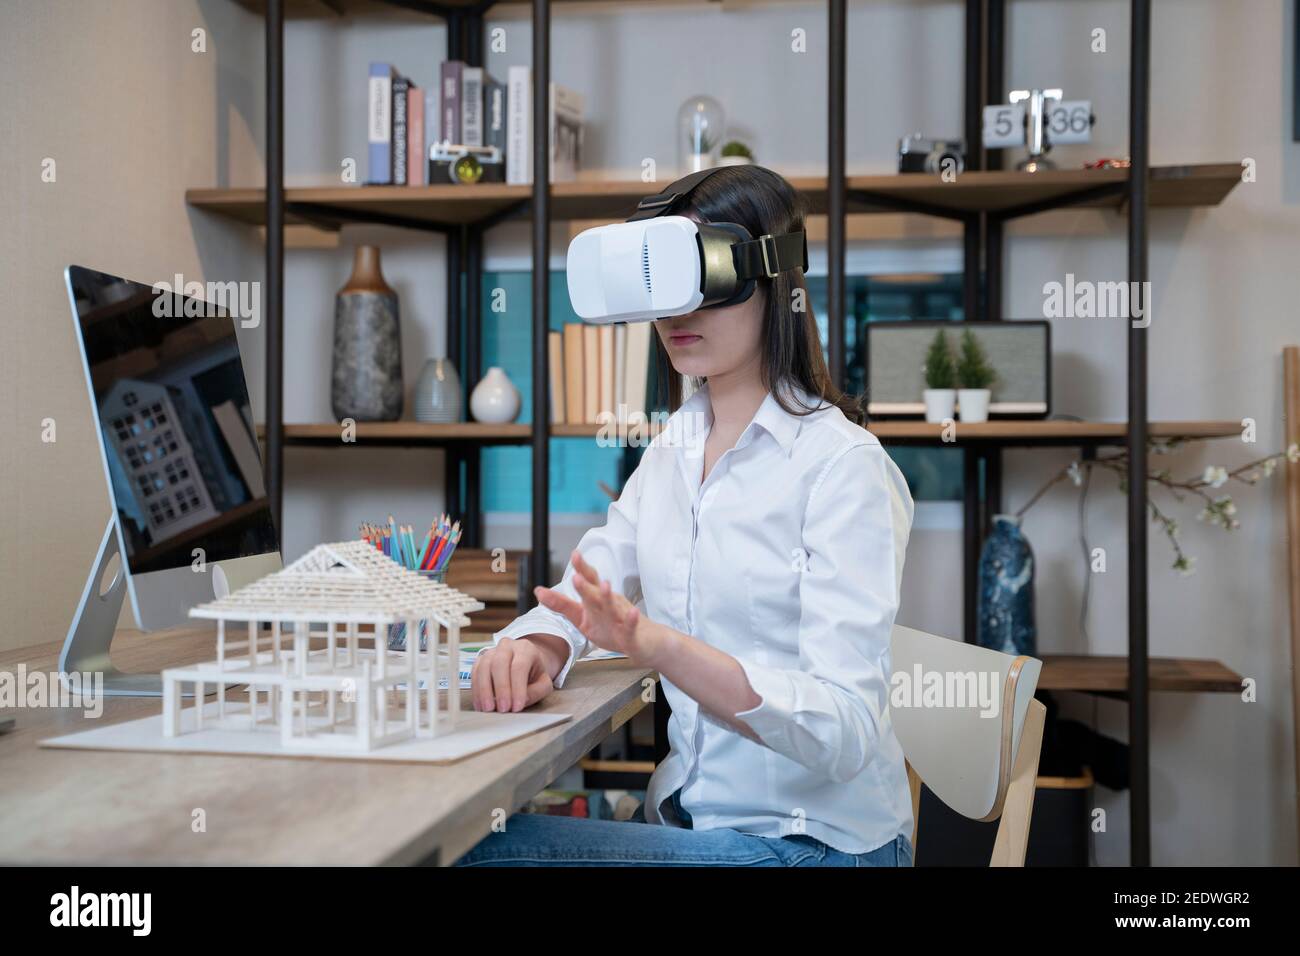 Women with architectural model and VR glasses. Stock Photo